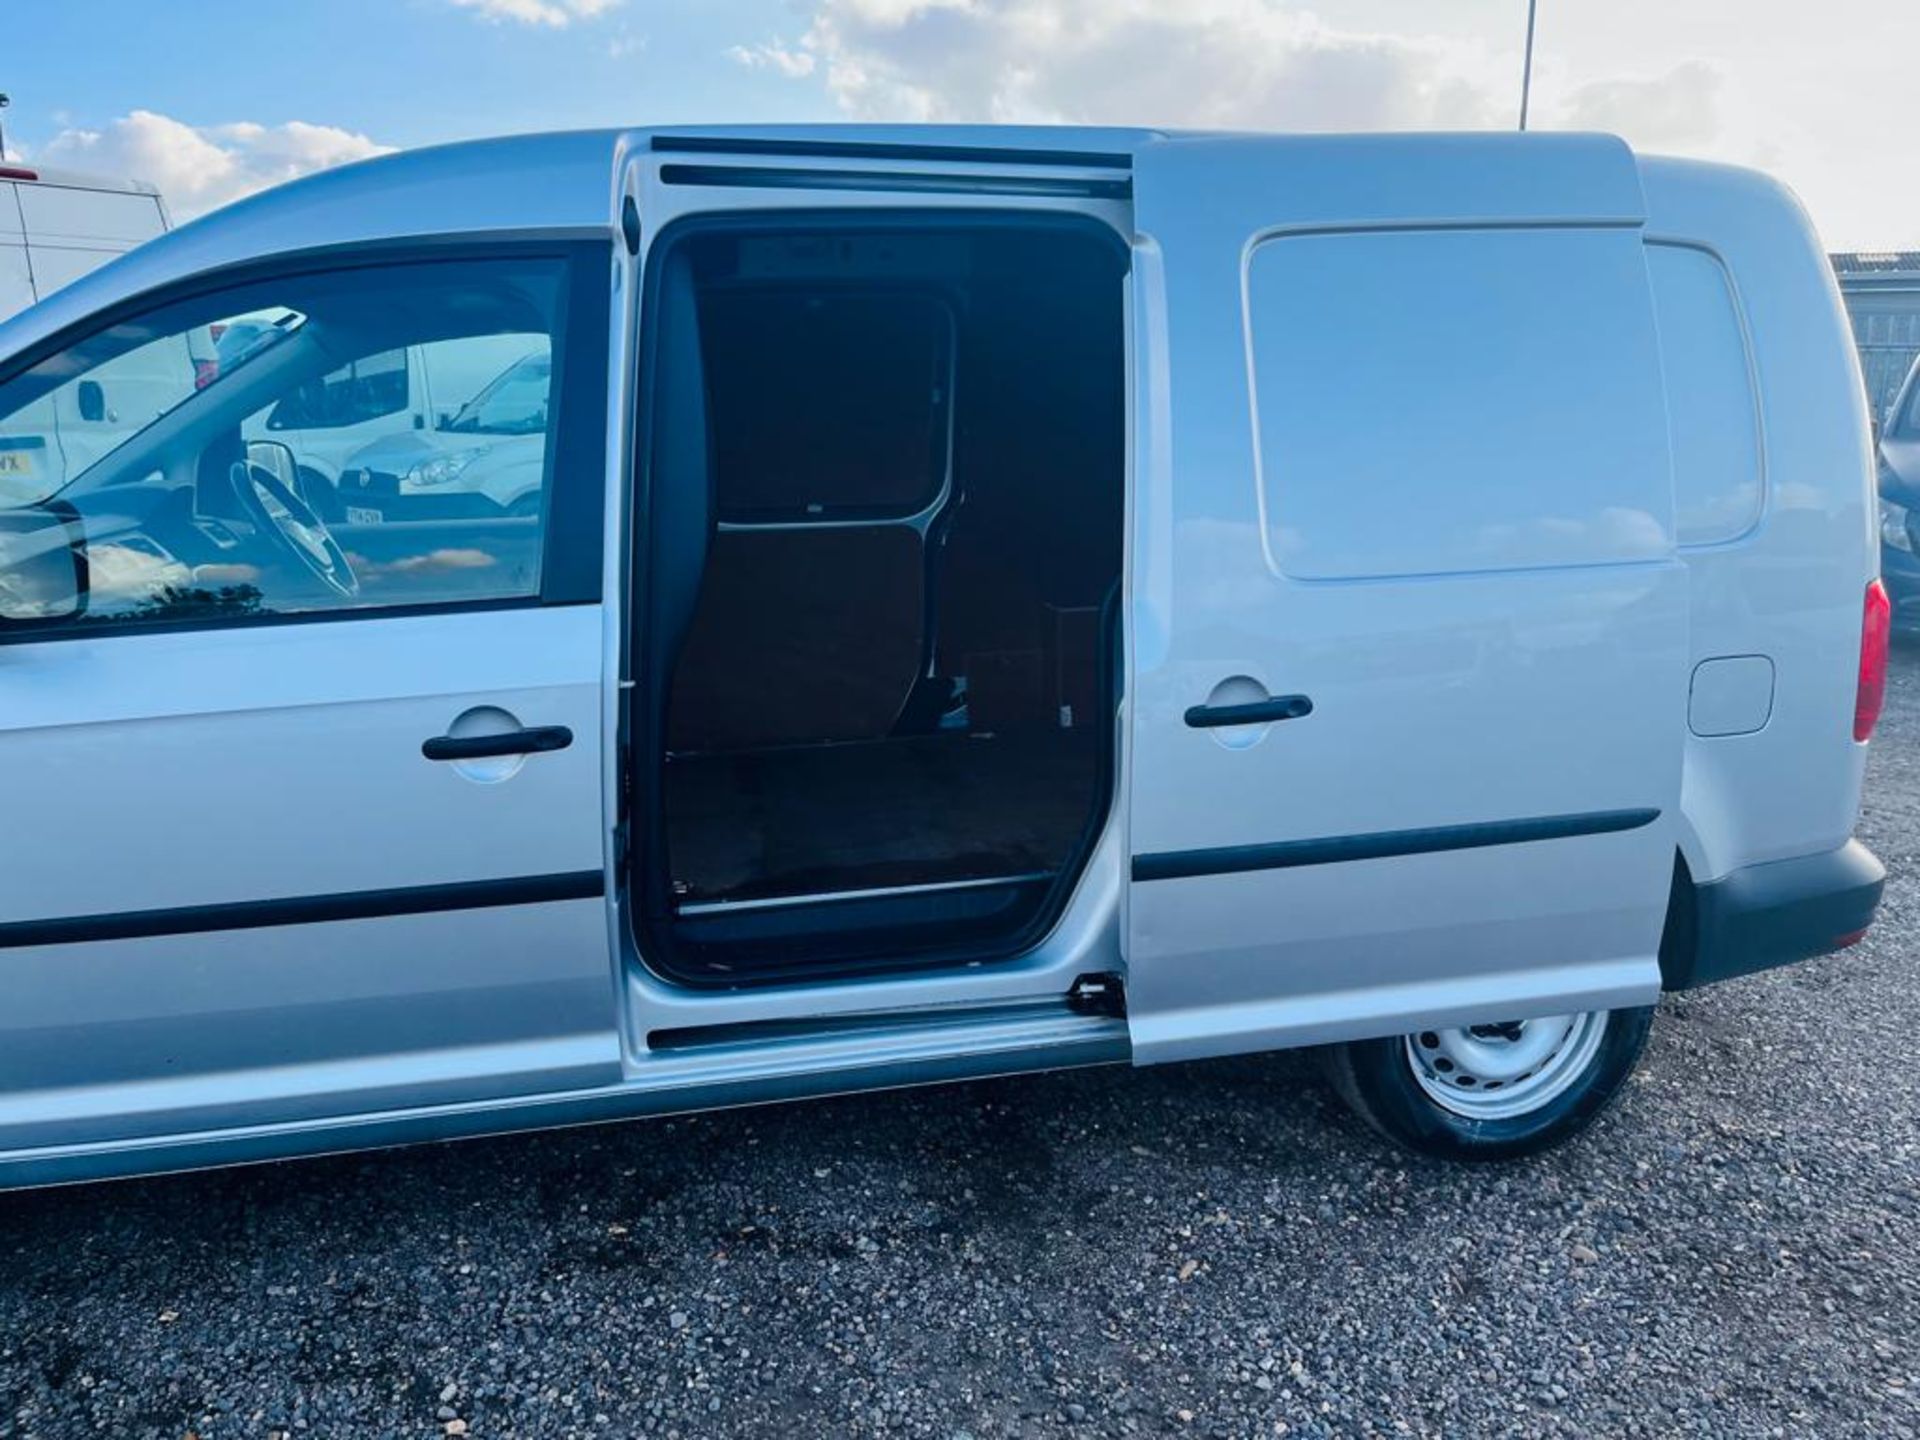 ** ON SALE ** Volkswagen Caddy Maxi C20 2.0 TDI 102 BMT Startline Automatic 2019 '19 Reg' - A/C - Image 6 of 30